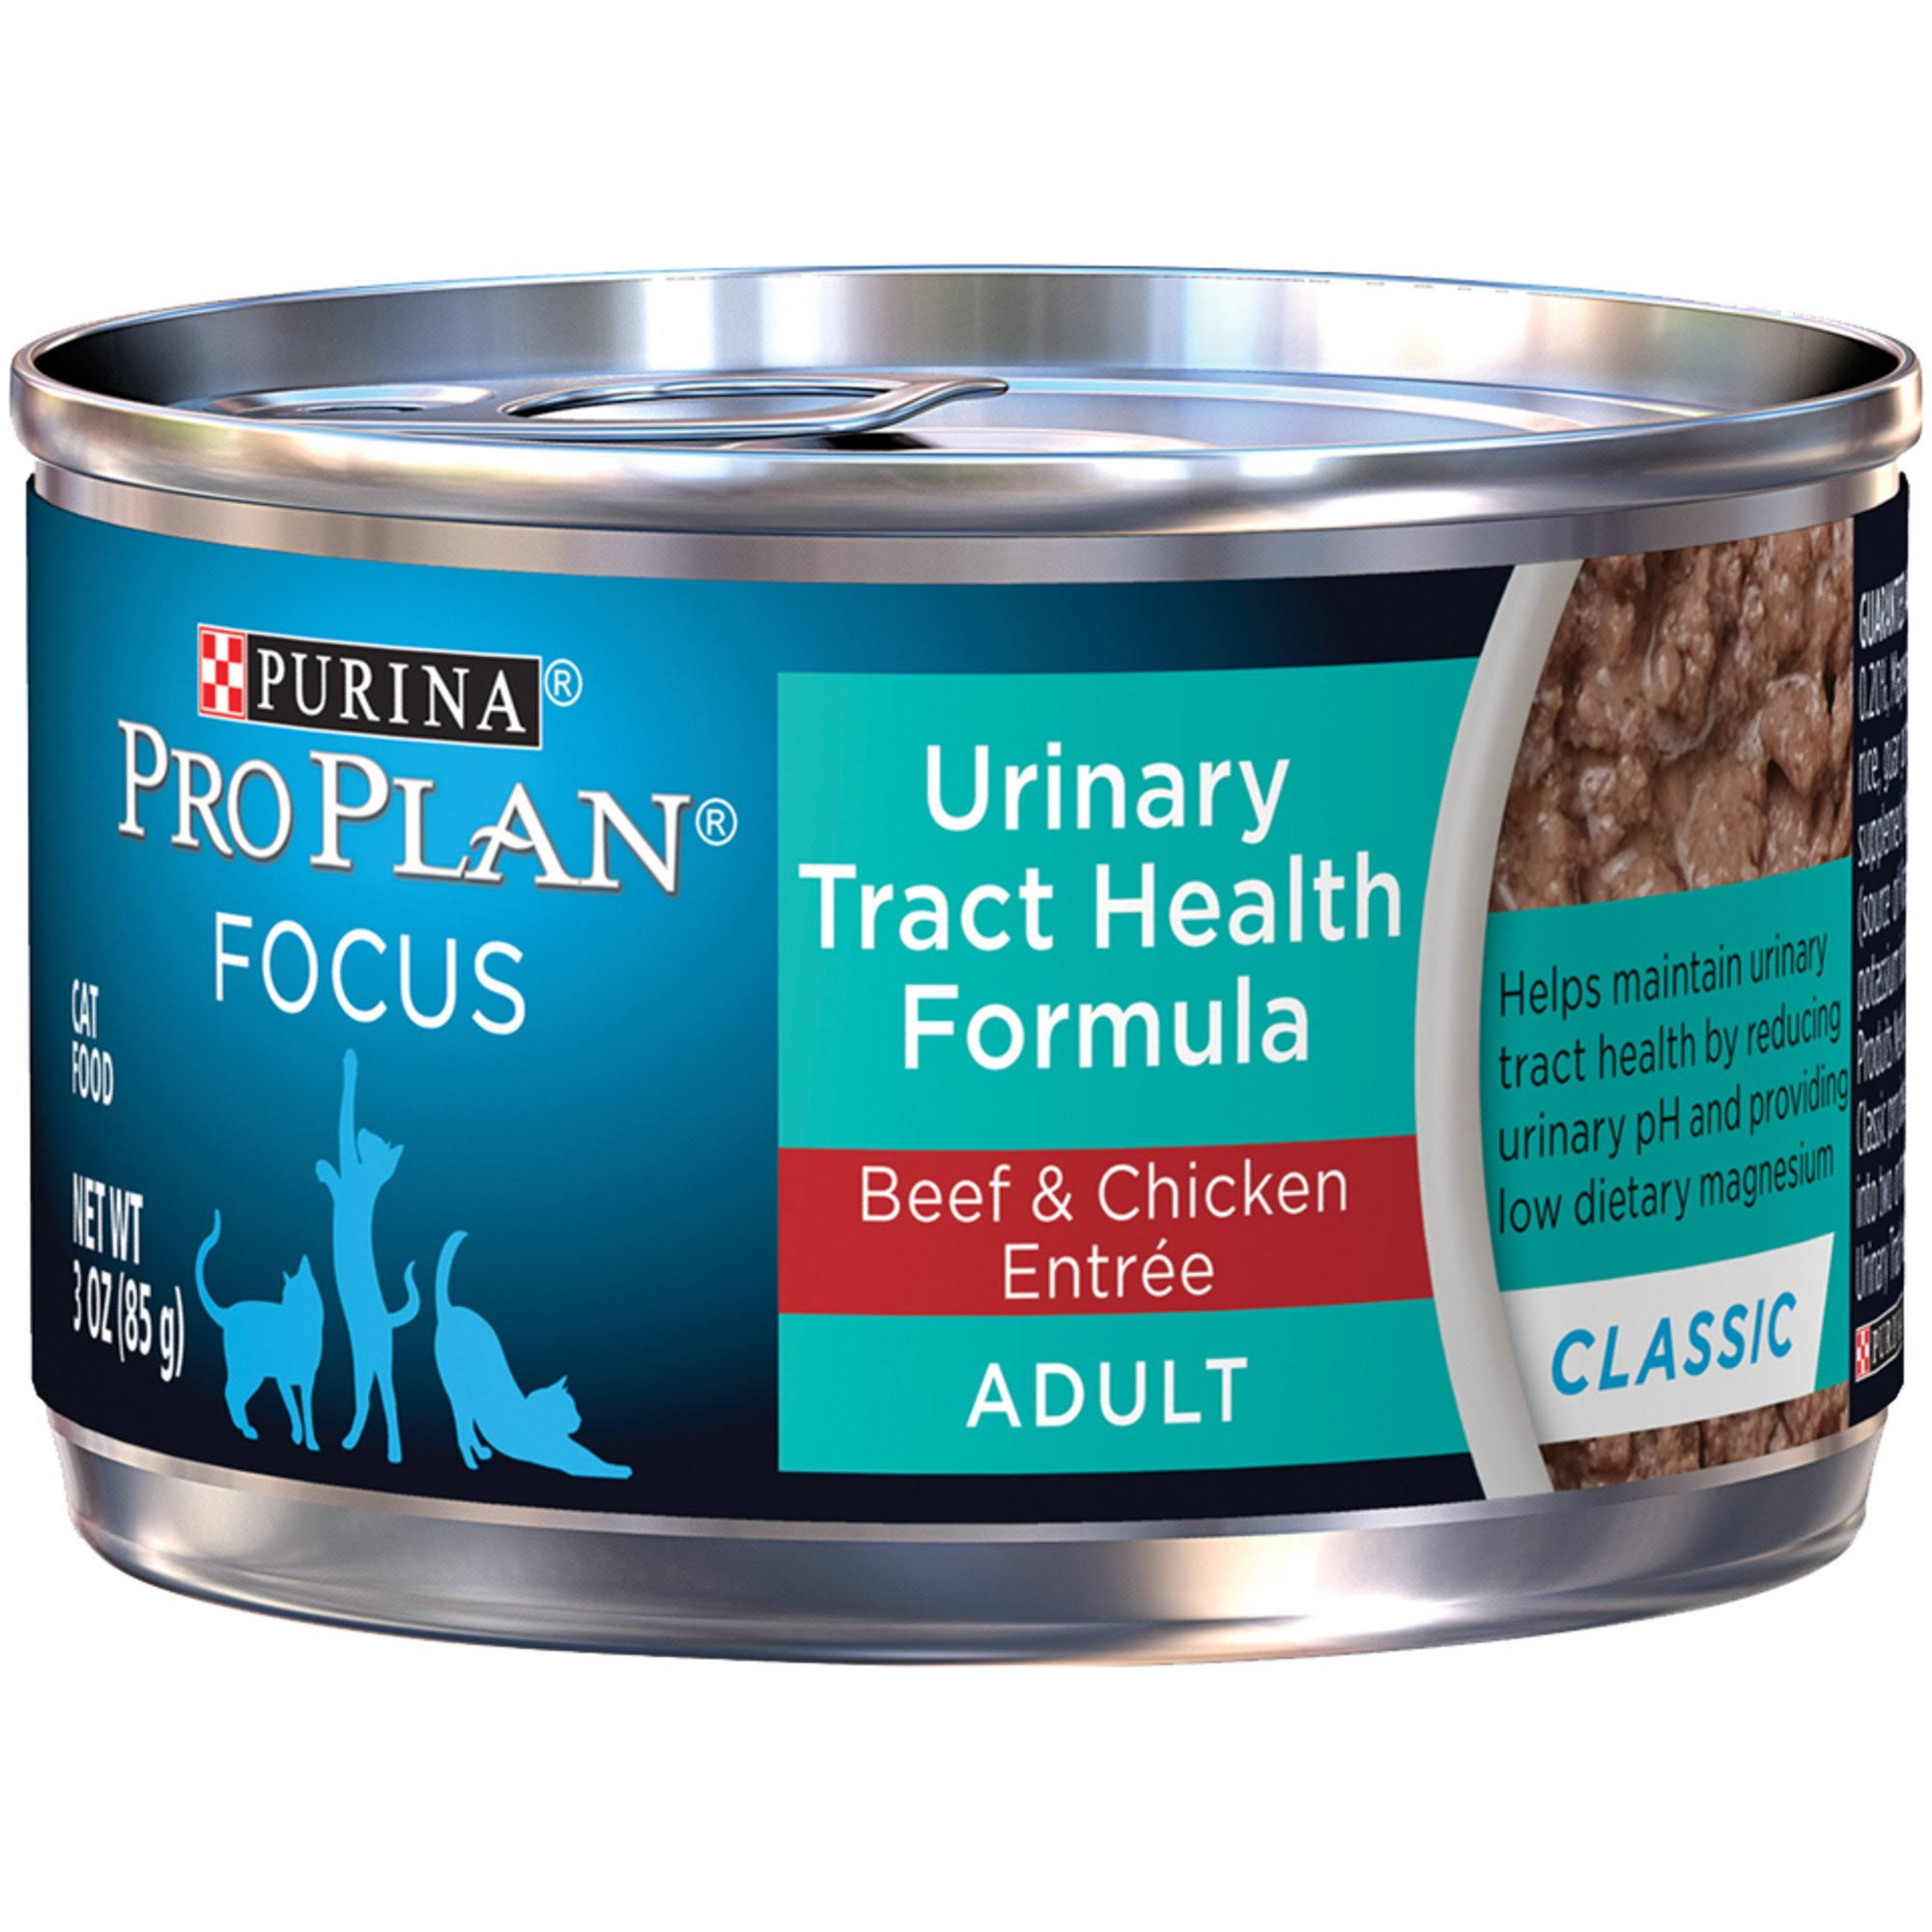 Purina Pro Plan Focus Adult Urinary Tract Health Formula Beef & Chicken Entree | Cats